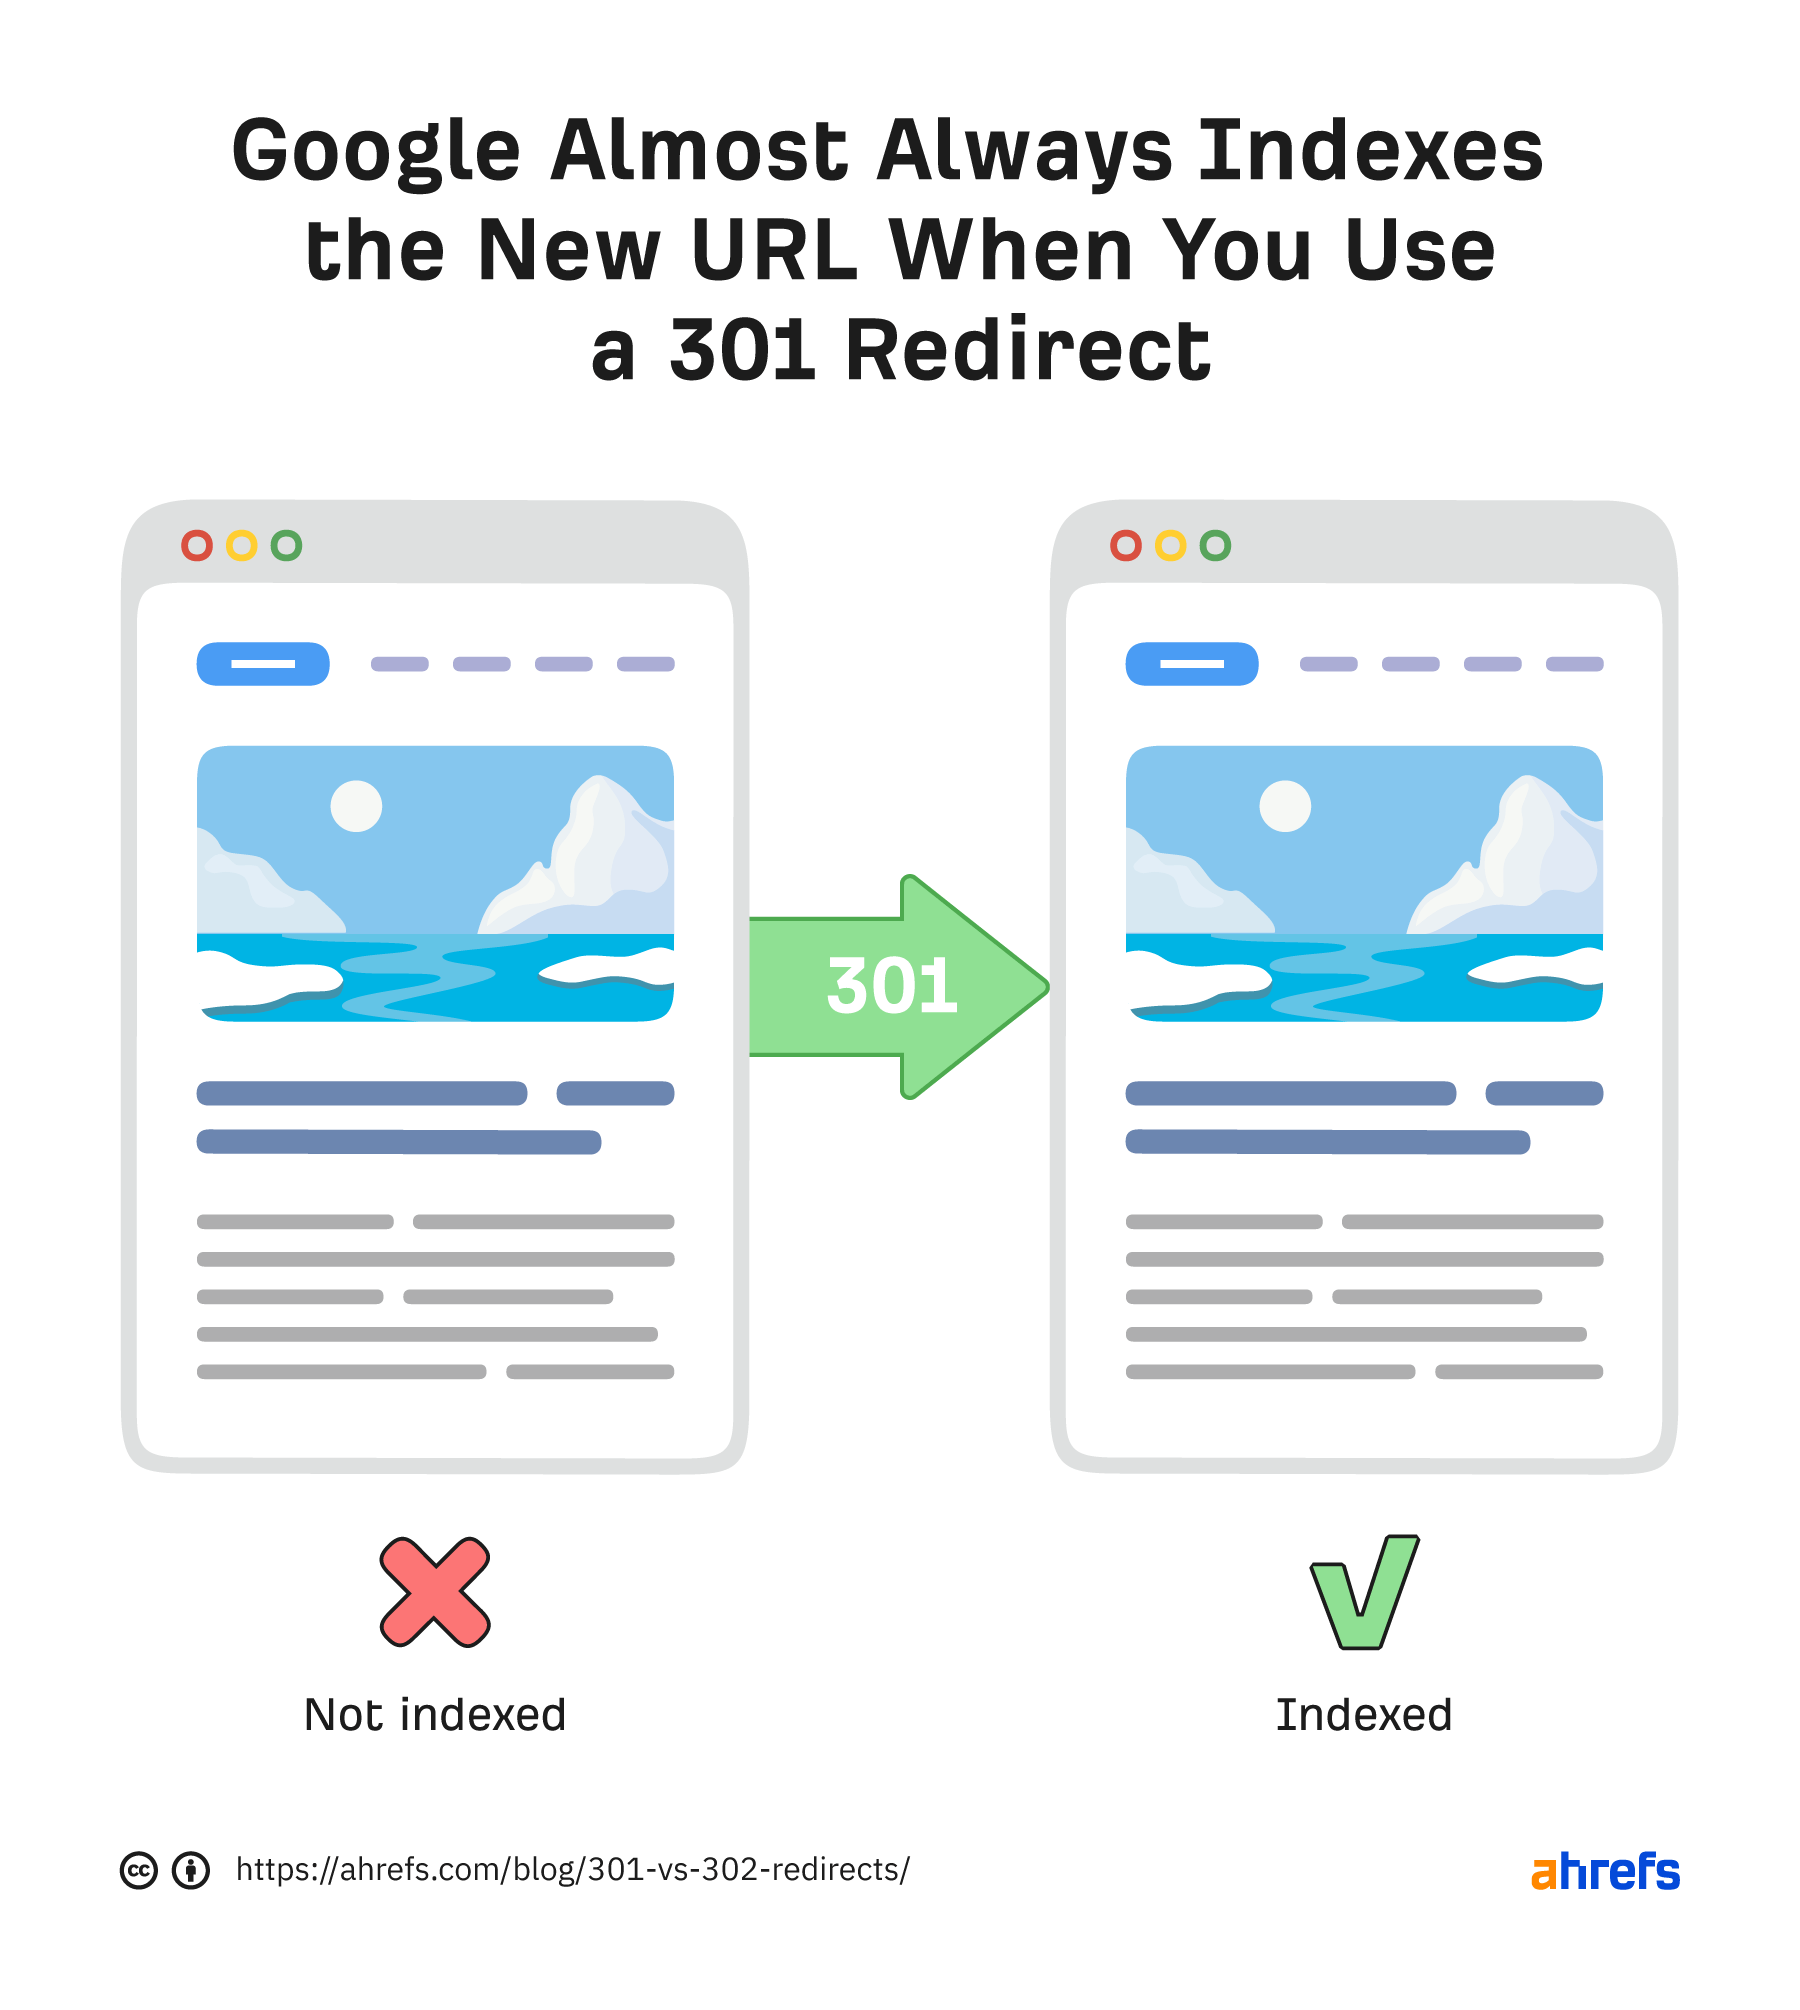 Google almost always indexes new URL when you use 301 redirect